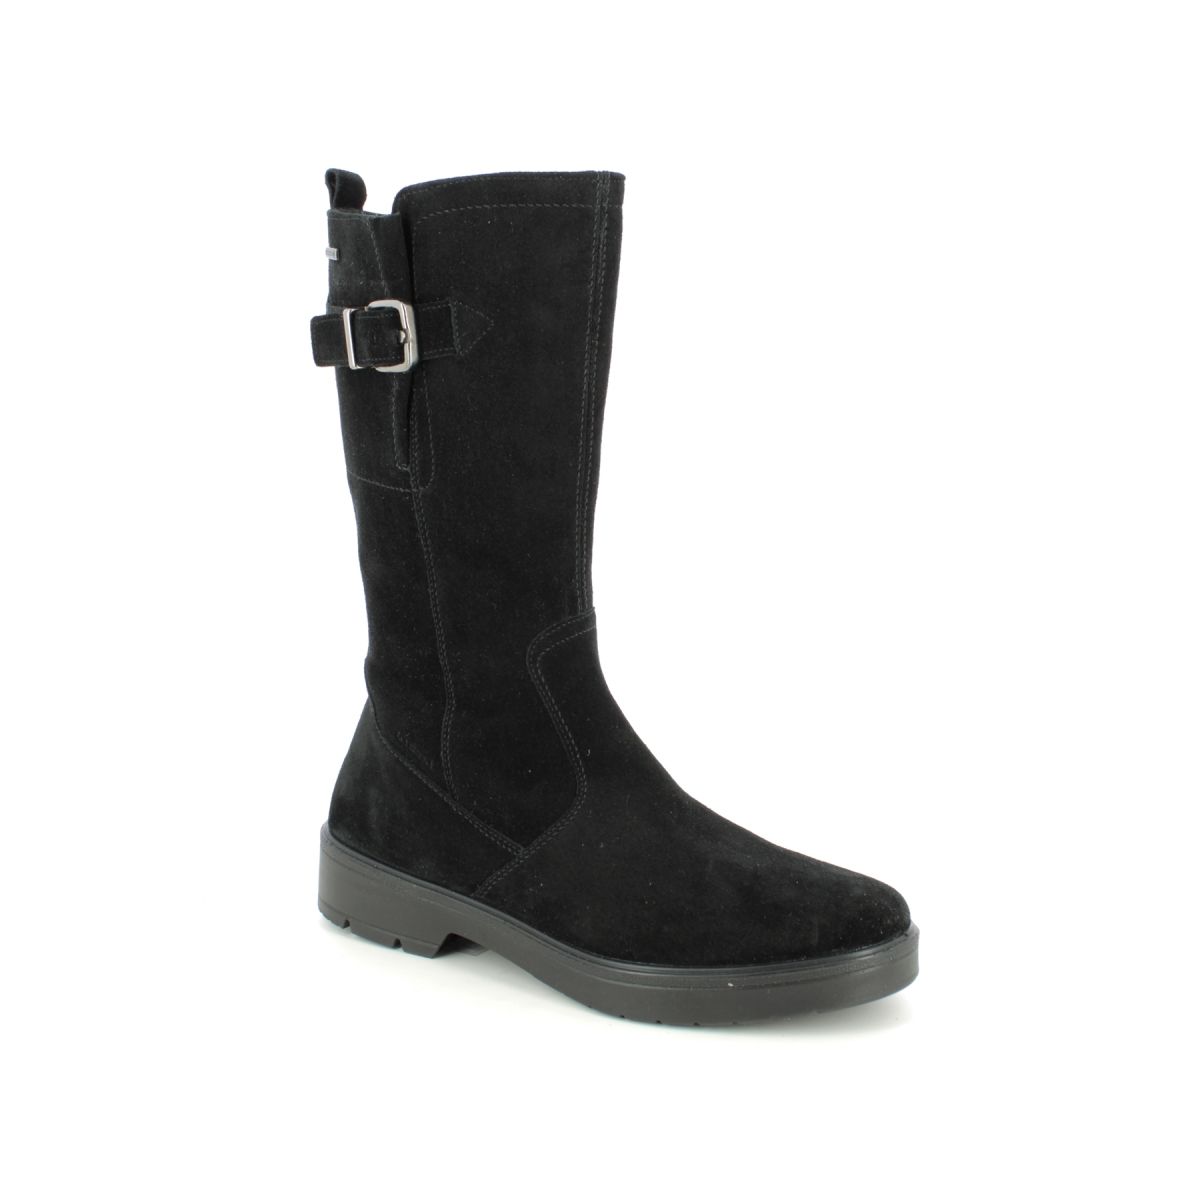 Legero Mystic Mid Gtx Black Suede Womens Mid Calf Boots 2000196-0000 In Size 5 In Plain Black Suede